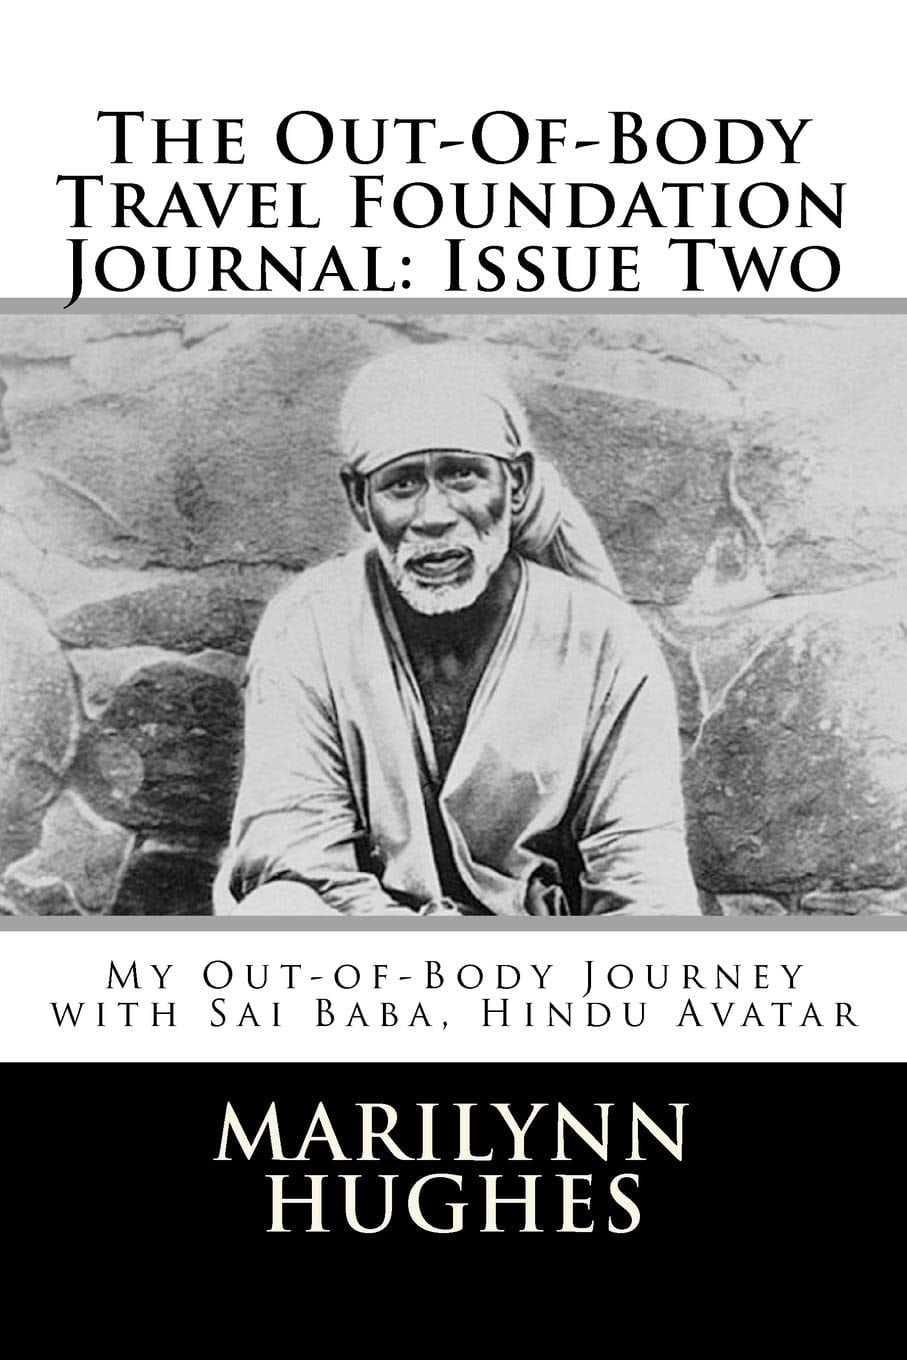 My Out-of-Body Journey with Sai Baba, Hindu Avatar, By Marilynn Hughes